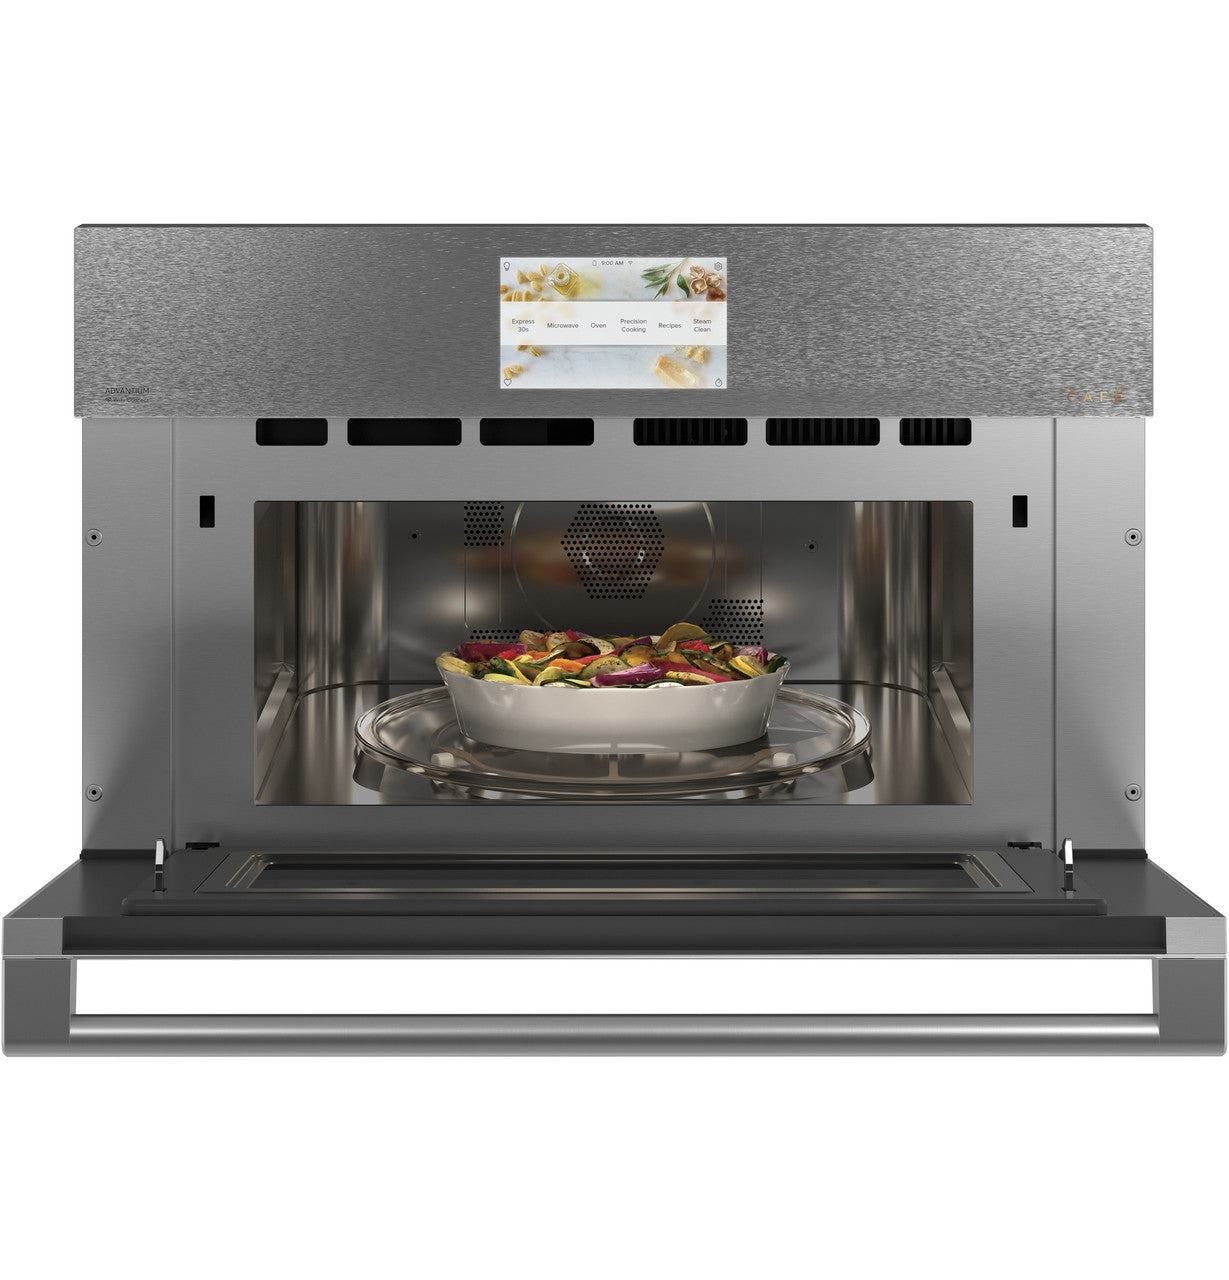 Café - 1.7 cu. ft Single Wall Oven in Platinum Glass - CSB913M2NS5